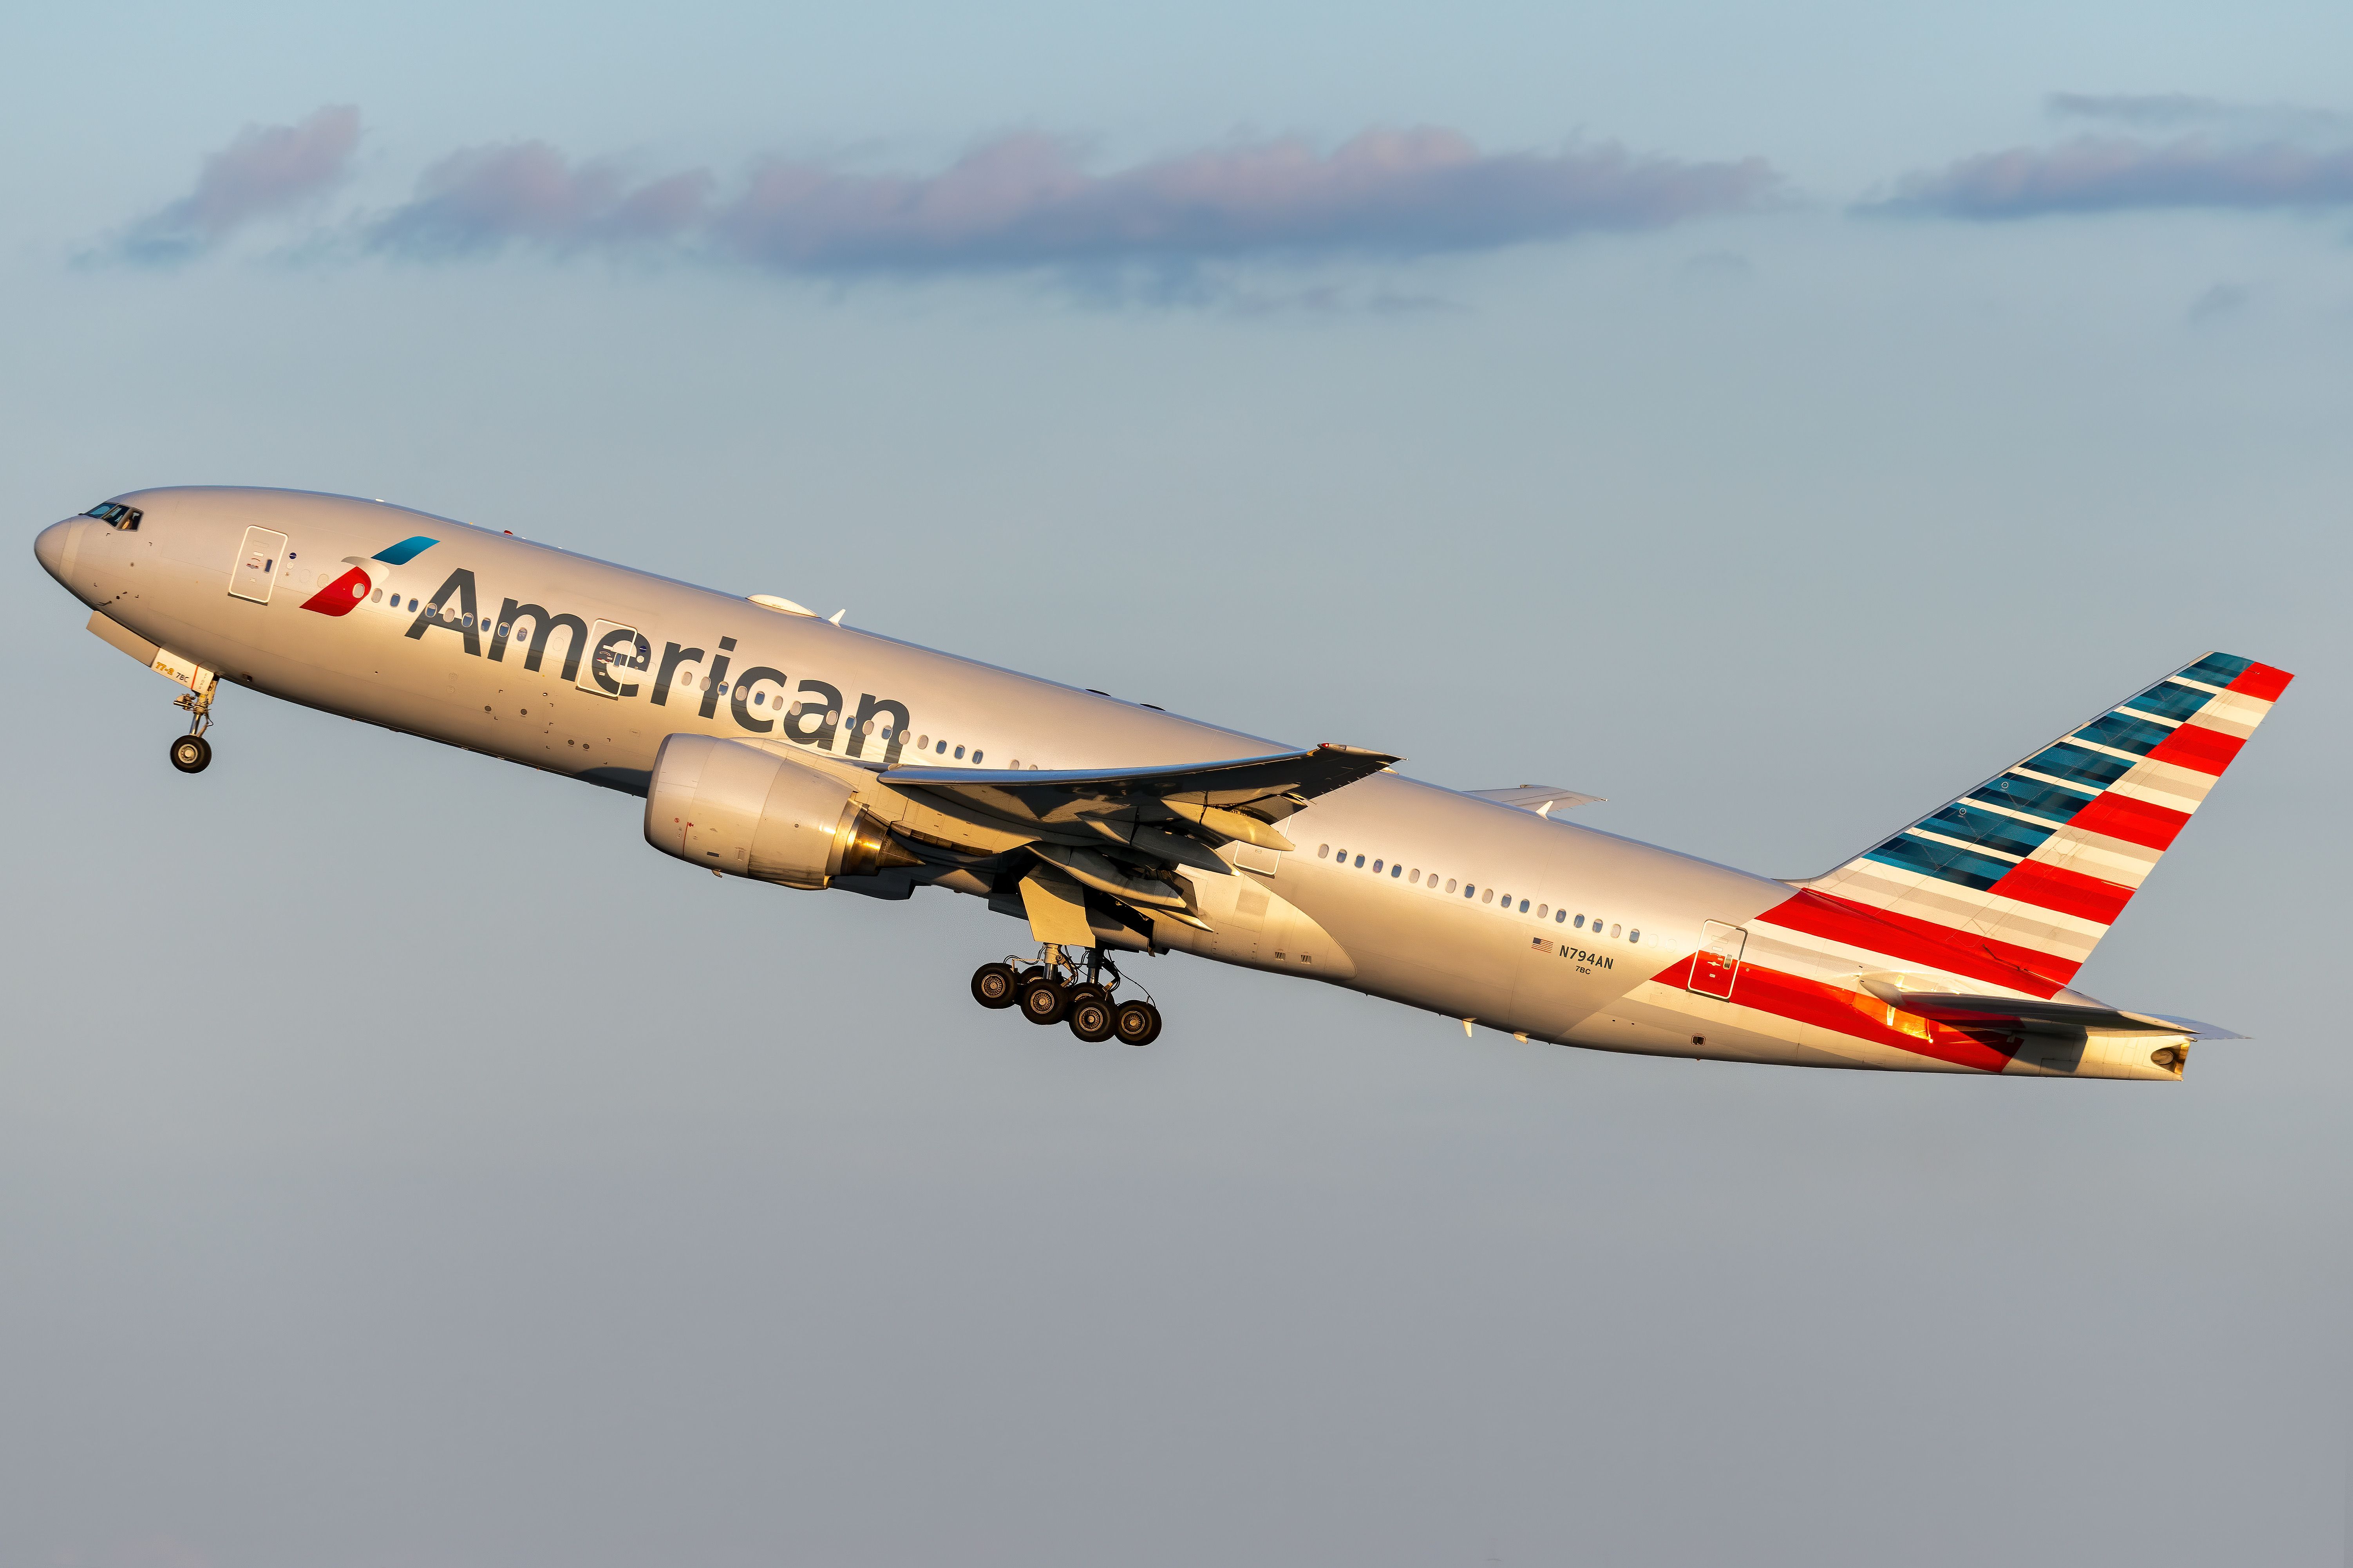 American Airlines Boeing 777 taking off